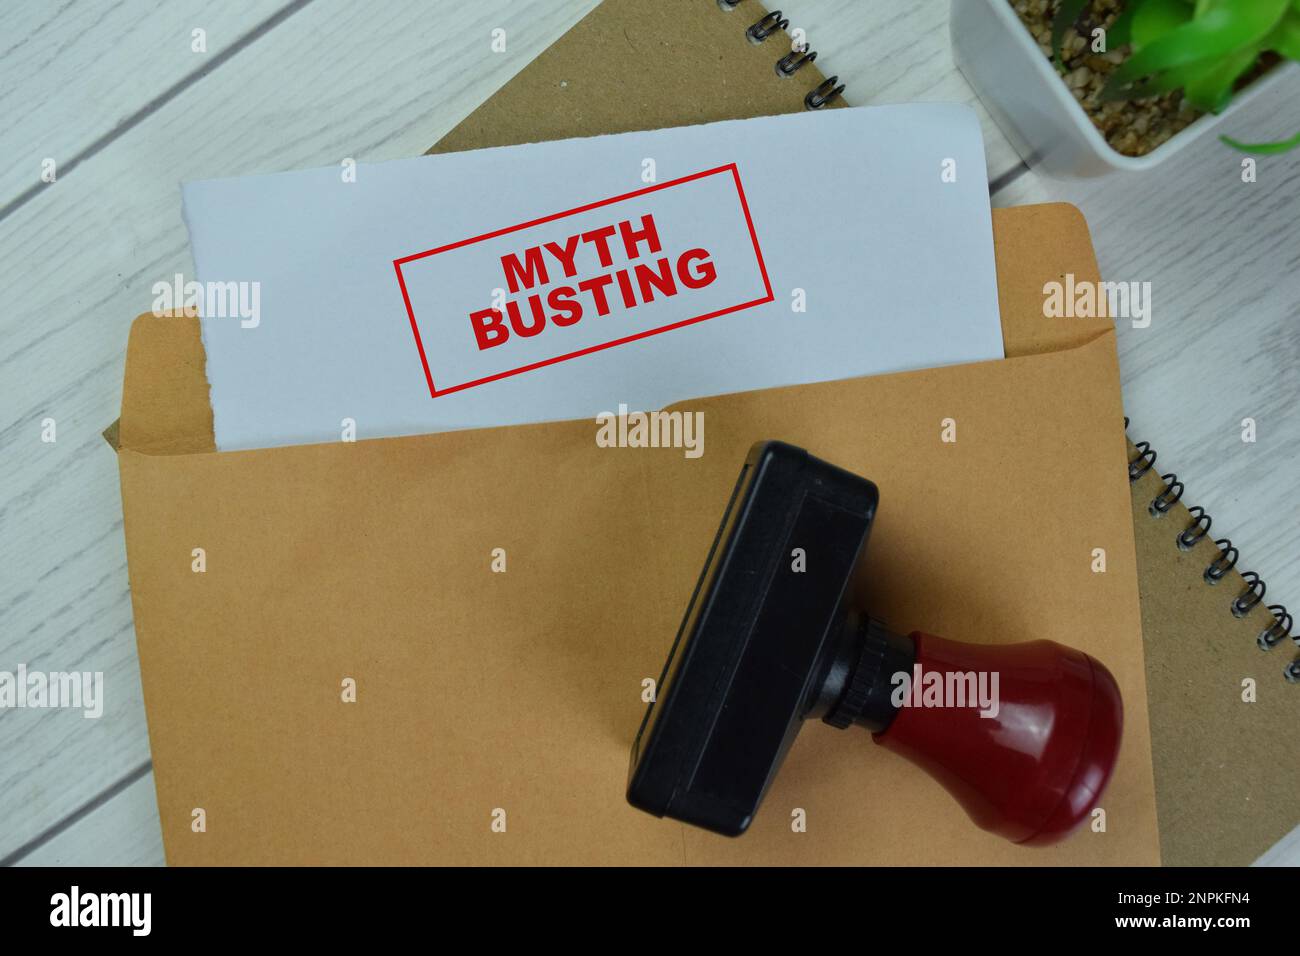 Concept of Red Handle Rubber Stamper and Myth Busting text above Brown envelope isolated on on Wooden Table. Stock Photo